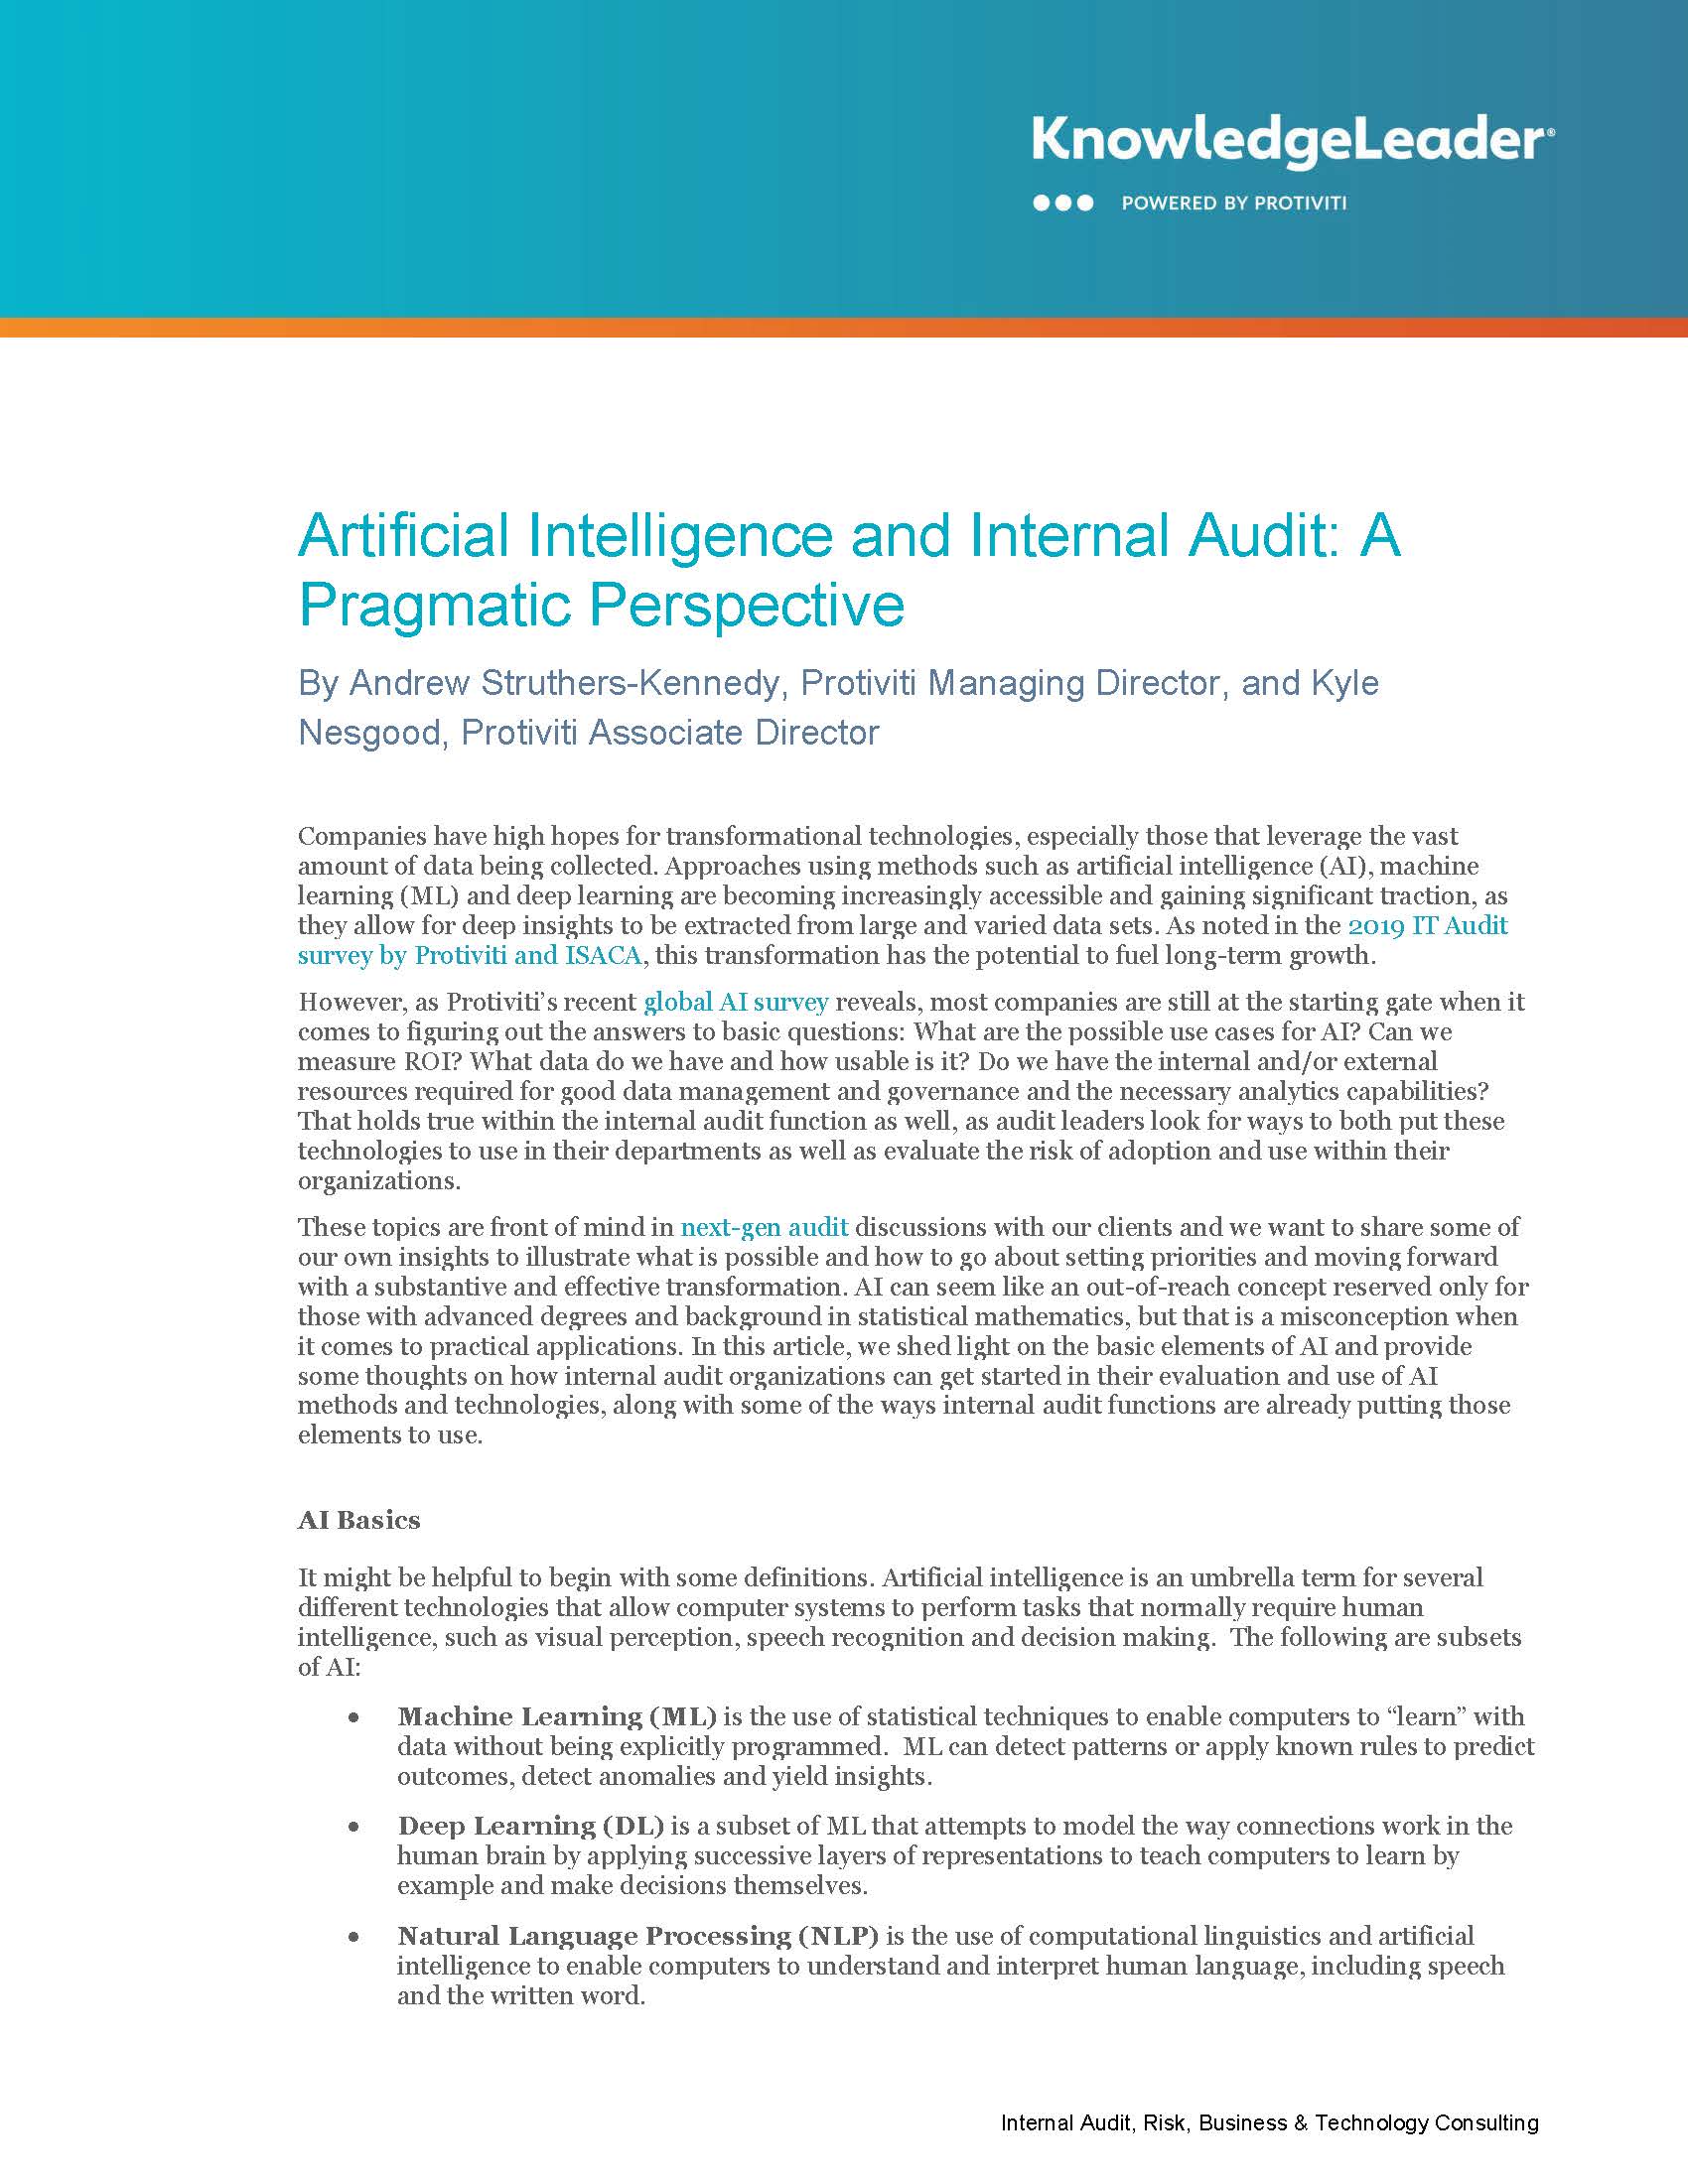 Screenshot of the first page of Artificial Intelligence and Internal Audit A Pragmatic Perspective